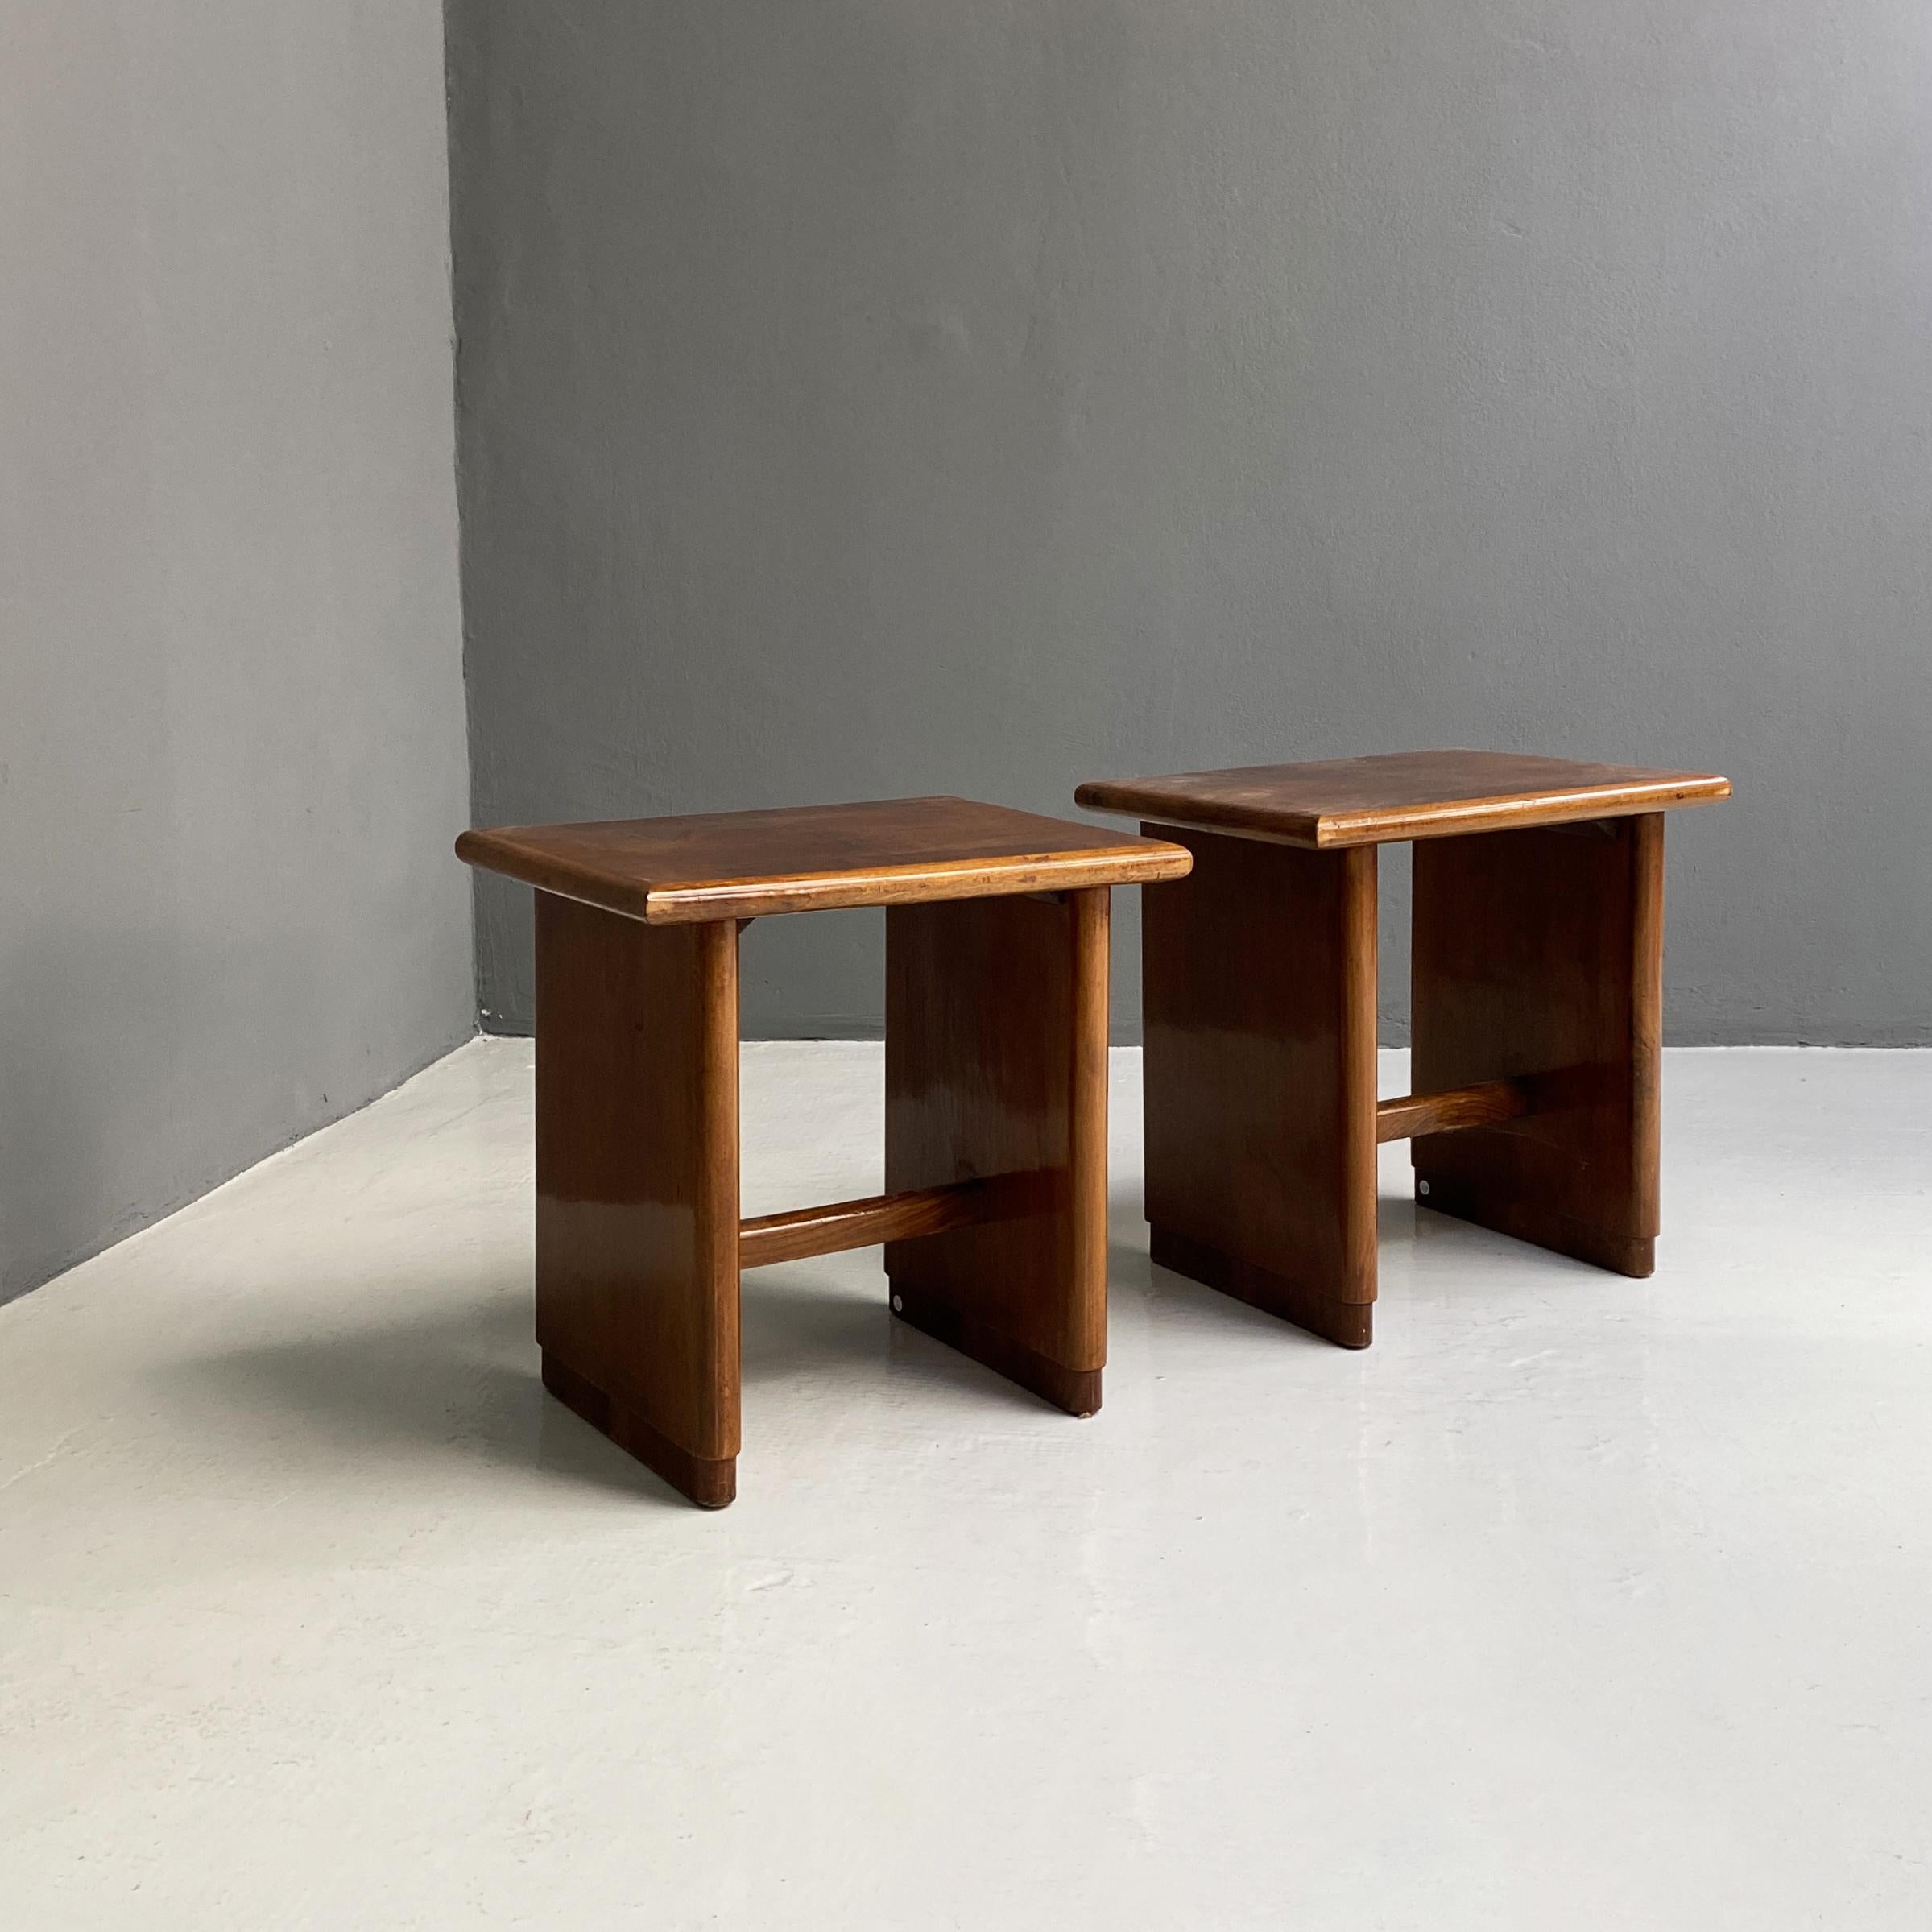 Italian Art Deco walnut wood stools, from the 1930s
Beautiful and elegance pair of art deco bedside table or stool in walnut wood with rounded corners and art deco line.
conserved in perfect condition.
1930s or 1940s periods 
This Fantastic couple